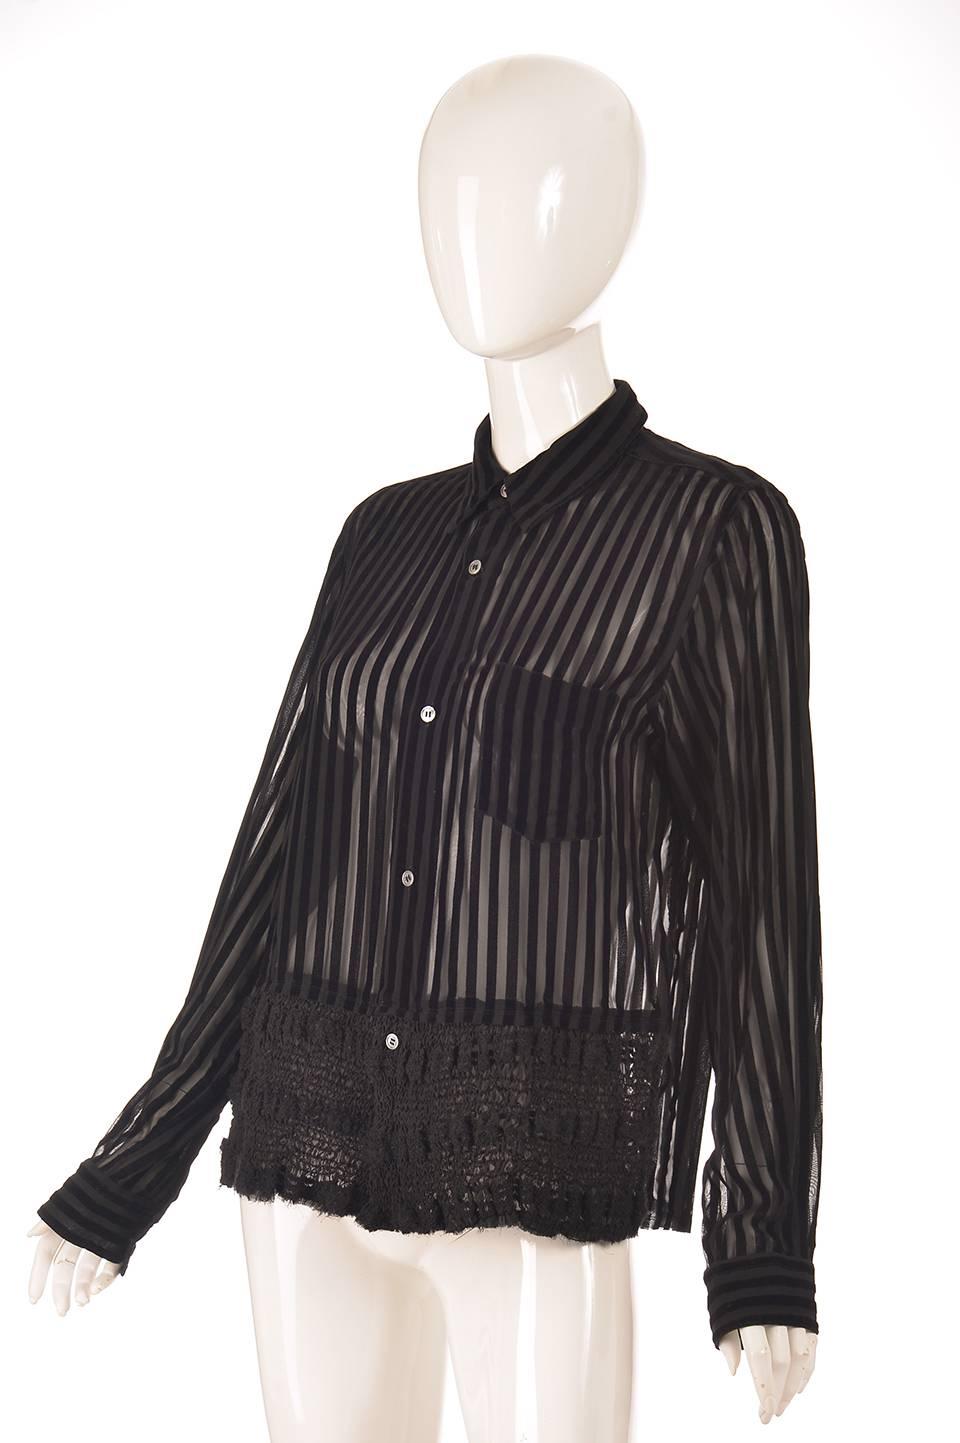 
This edgy sheer and velvet striped shirt was designed by Junya Watanabe of Comme des Garcons fame. The blouse has a front left breast pocket, a delicately sheared front hem, and is accented by five mother of pearl buttons going down the front of